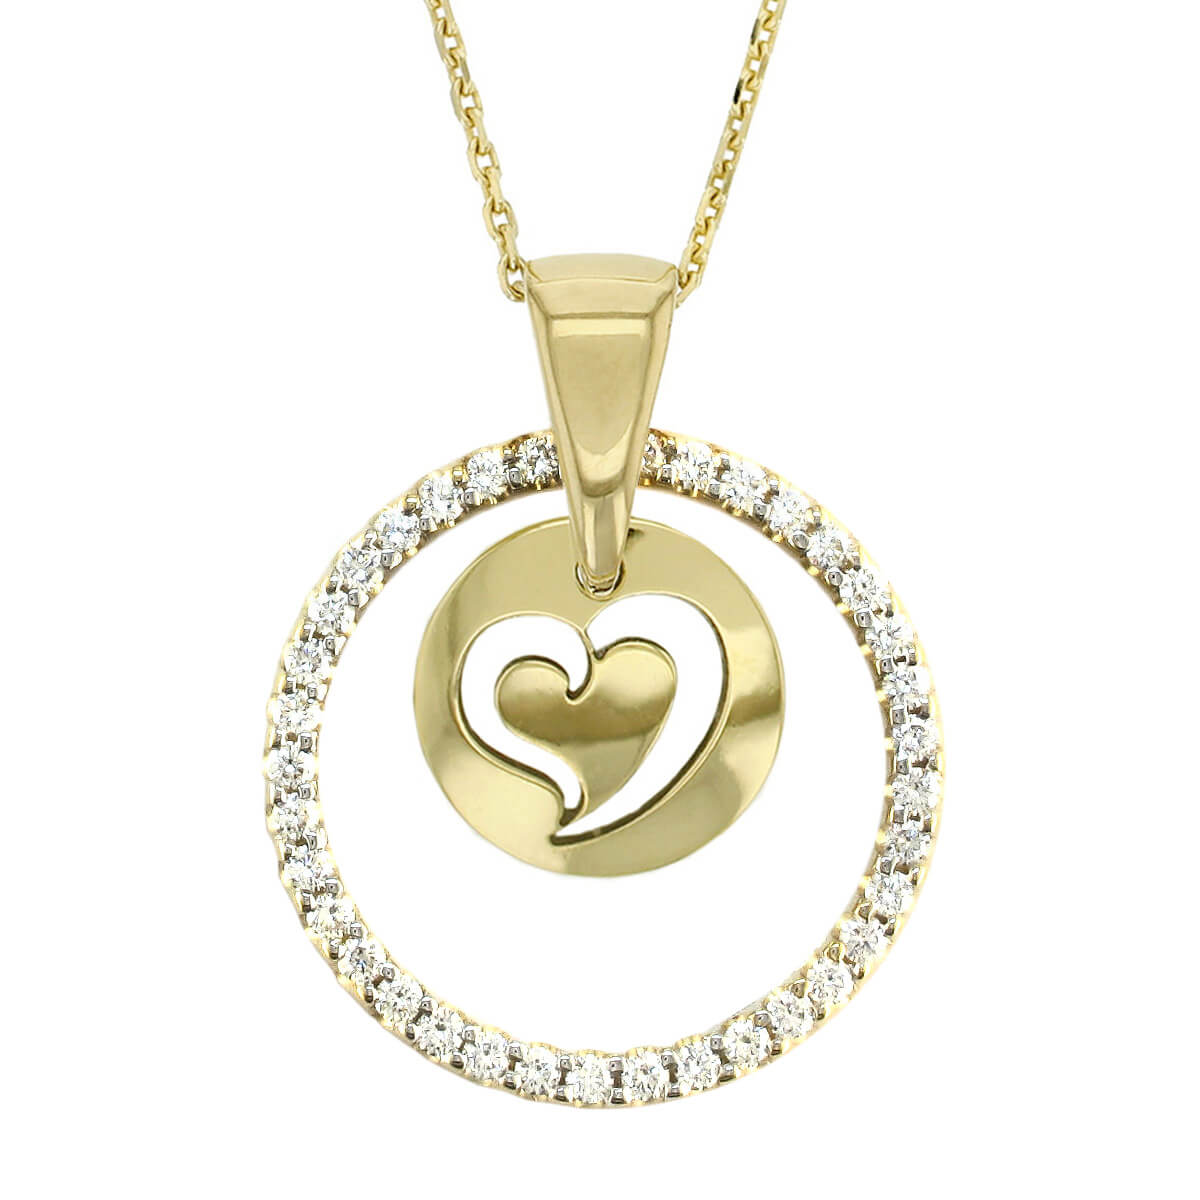 All 18ct yellow gold with diamonds and chain